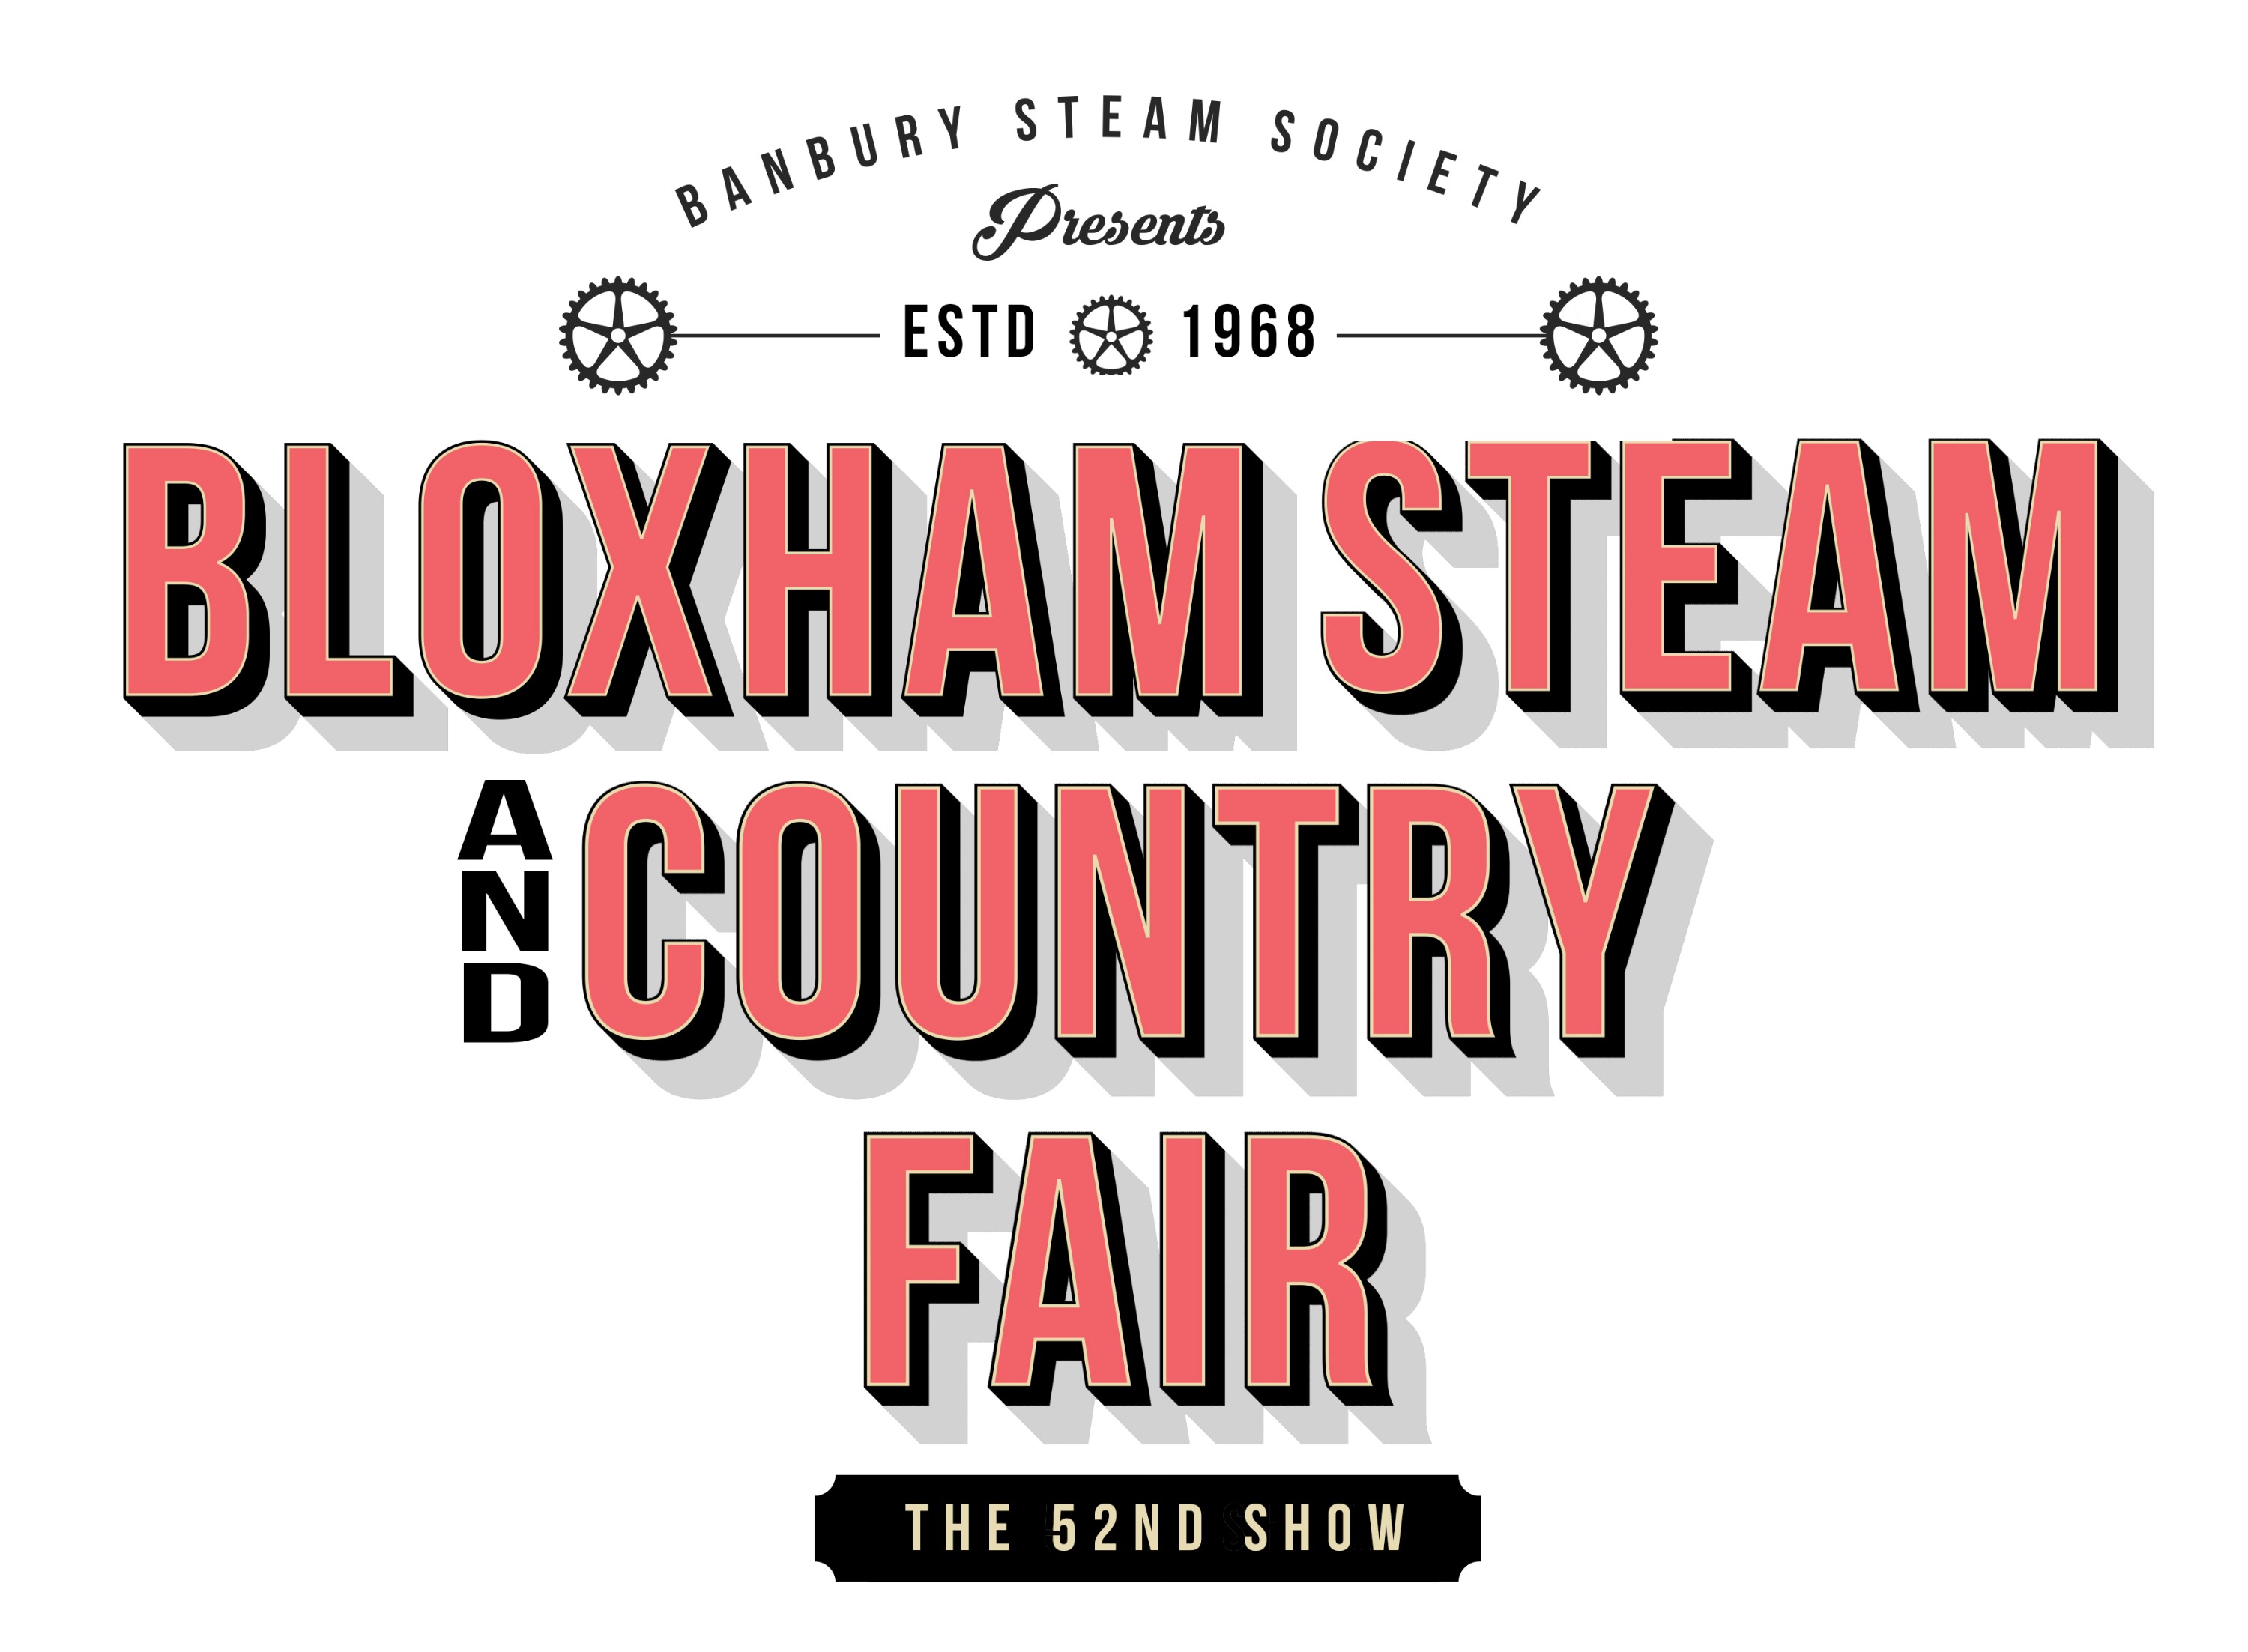 Bloxham Steam and Country Fair - The 52nd Show